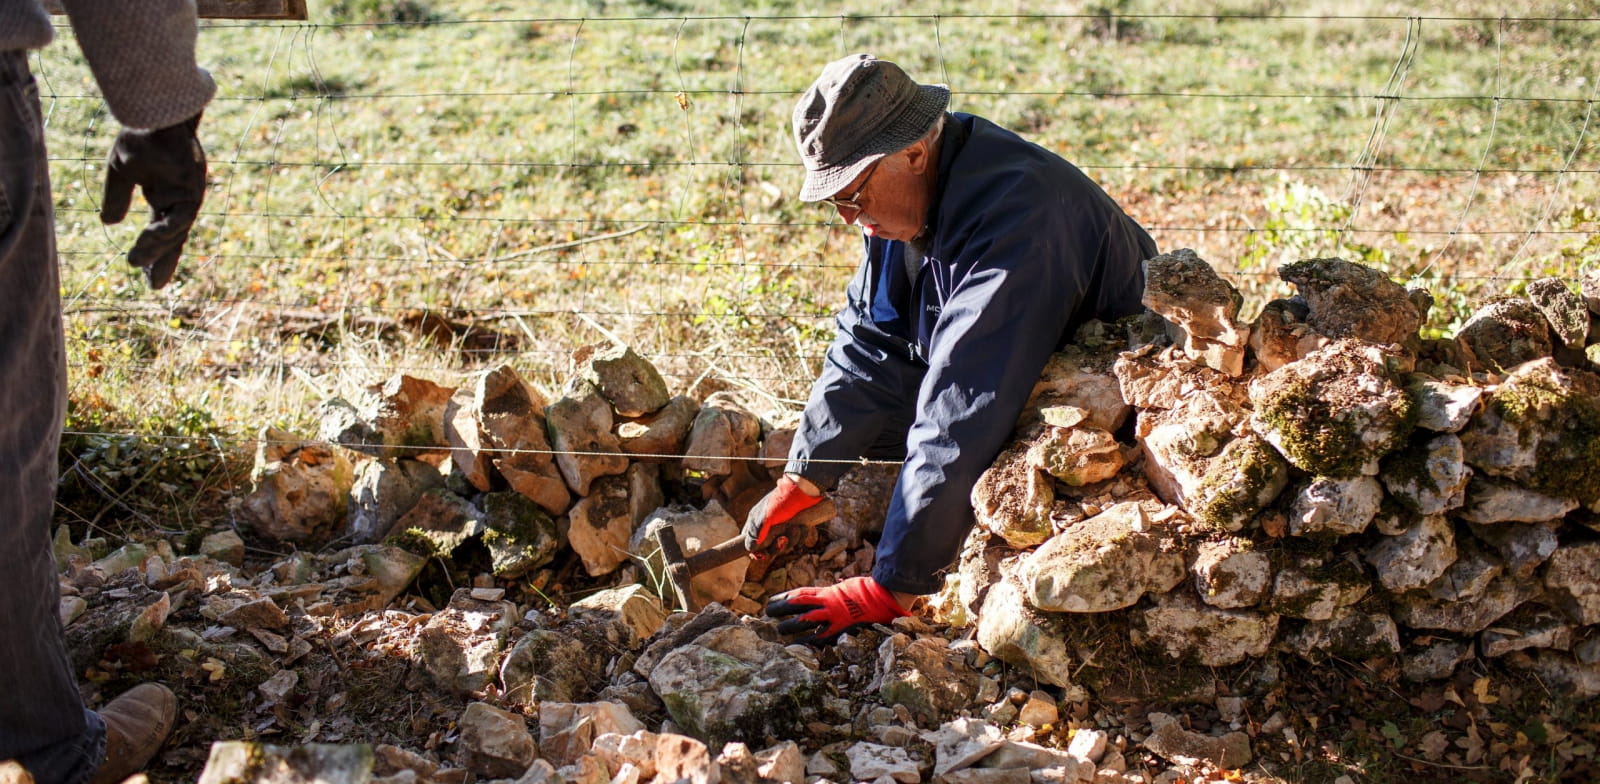 A dry stone wall reconstruction site by 1000 hands in the dough